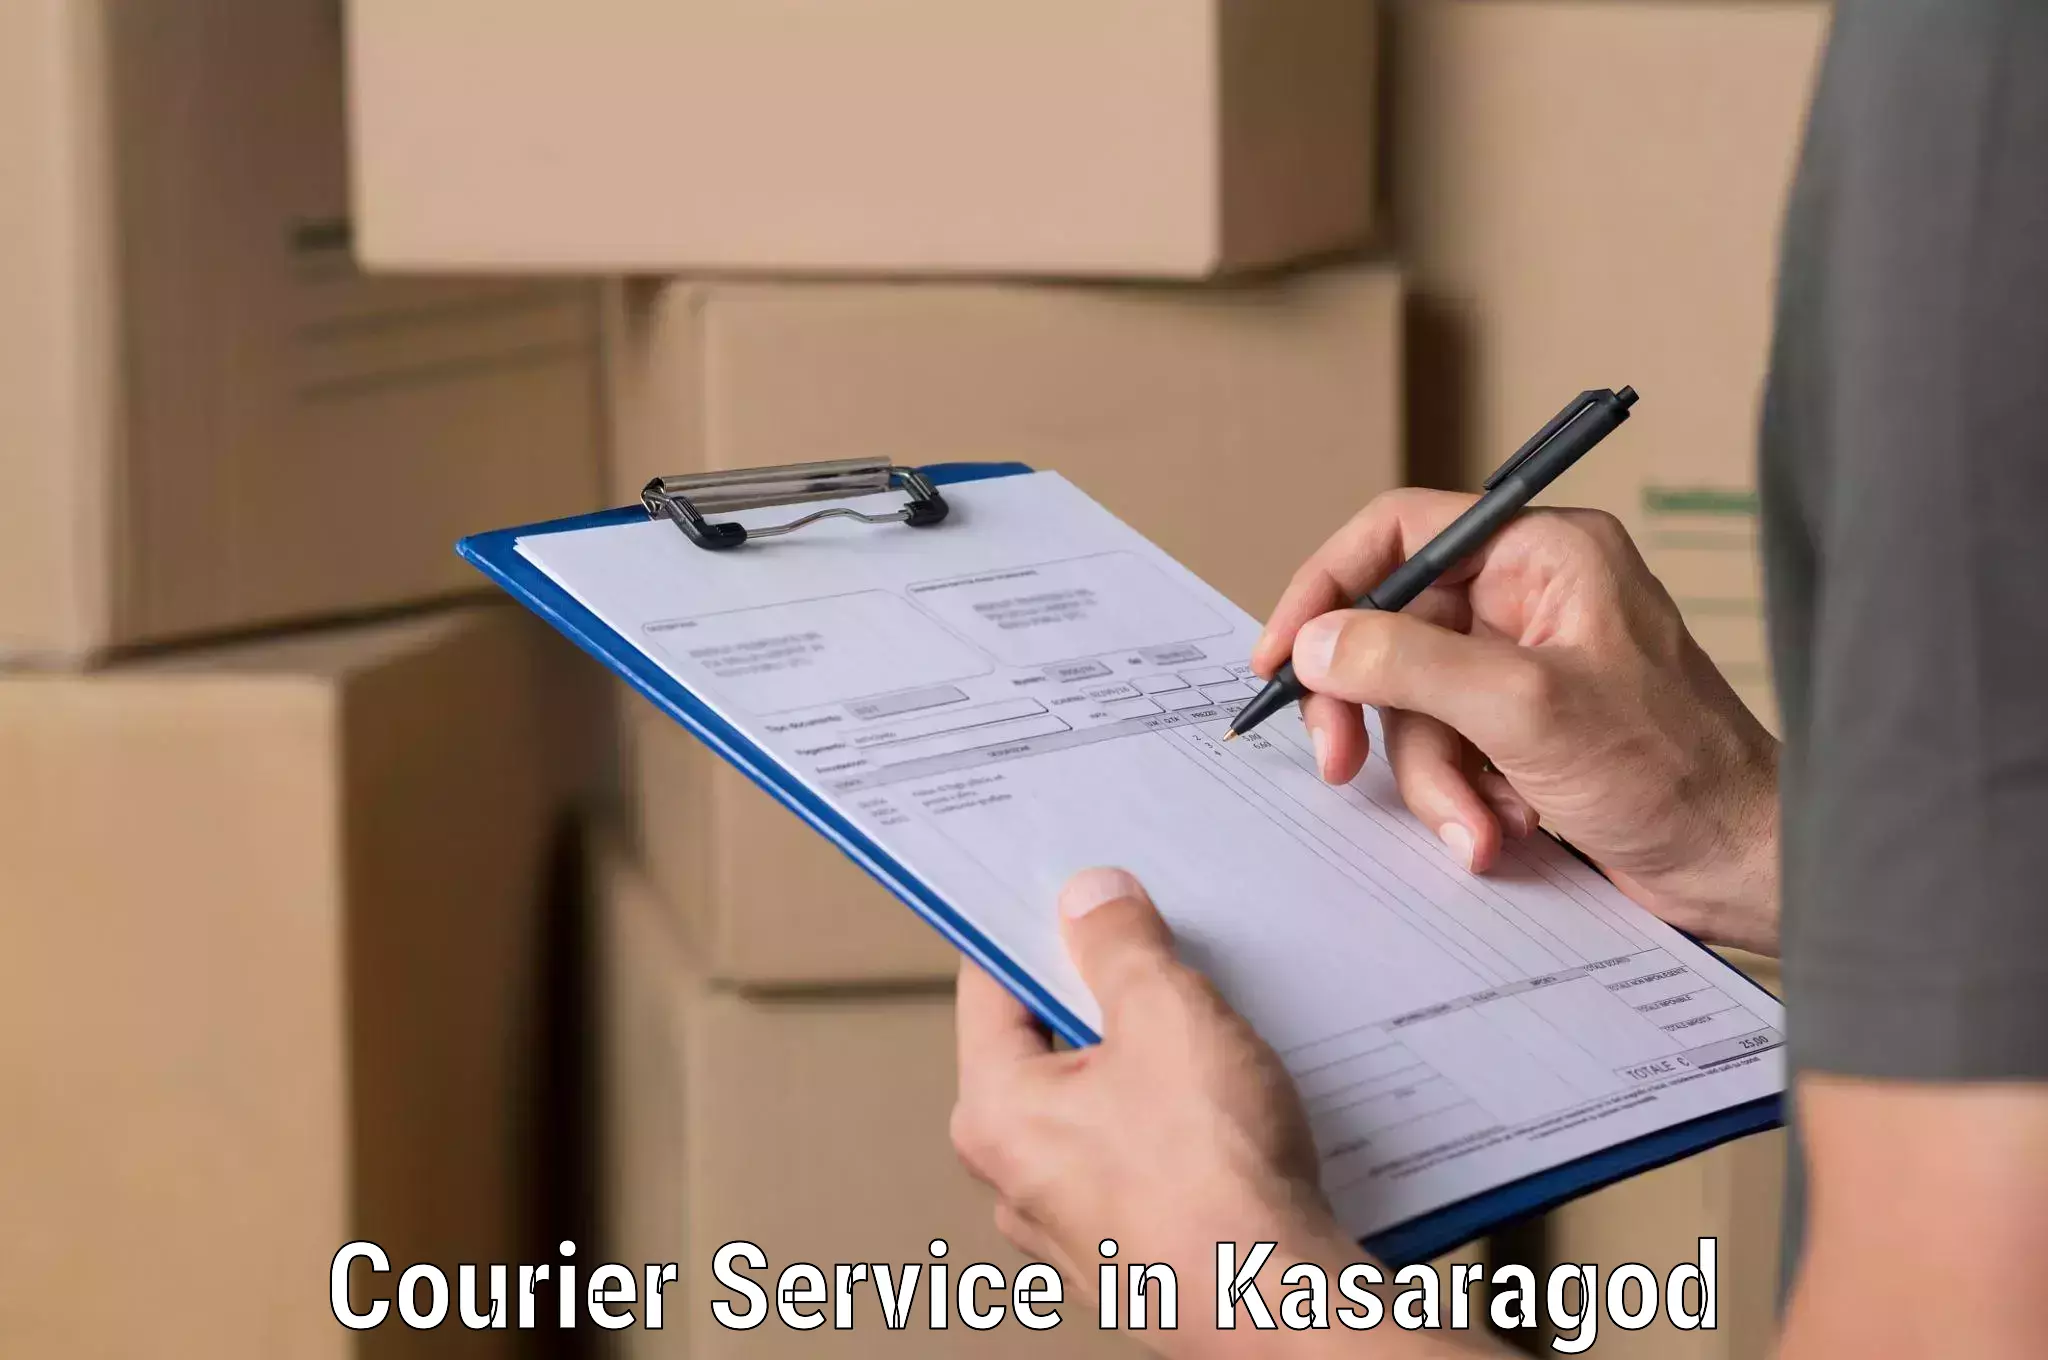 Fast delivery service in Kasaragod